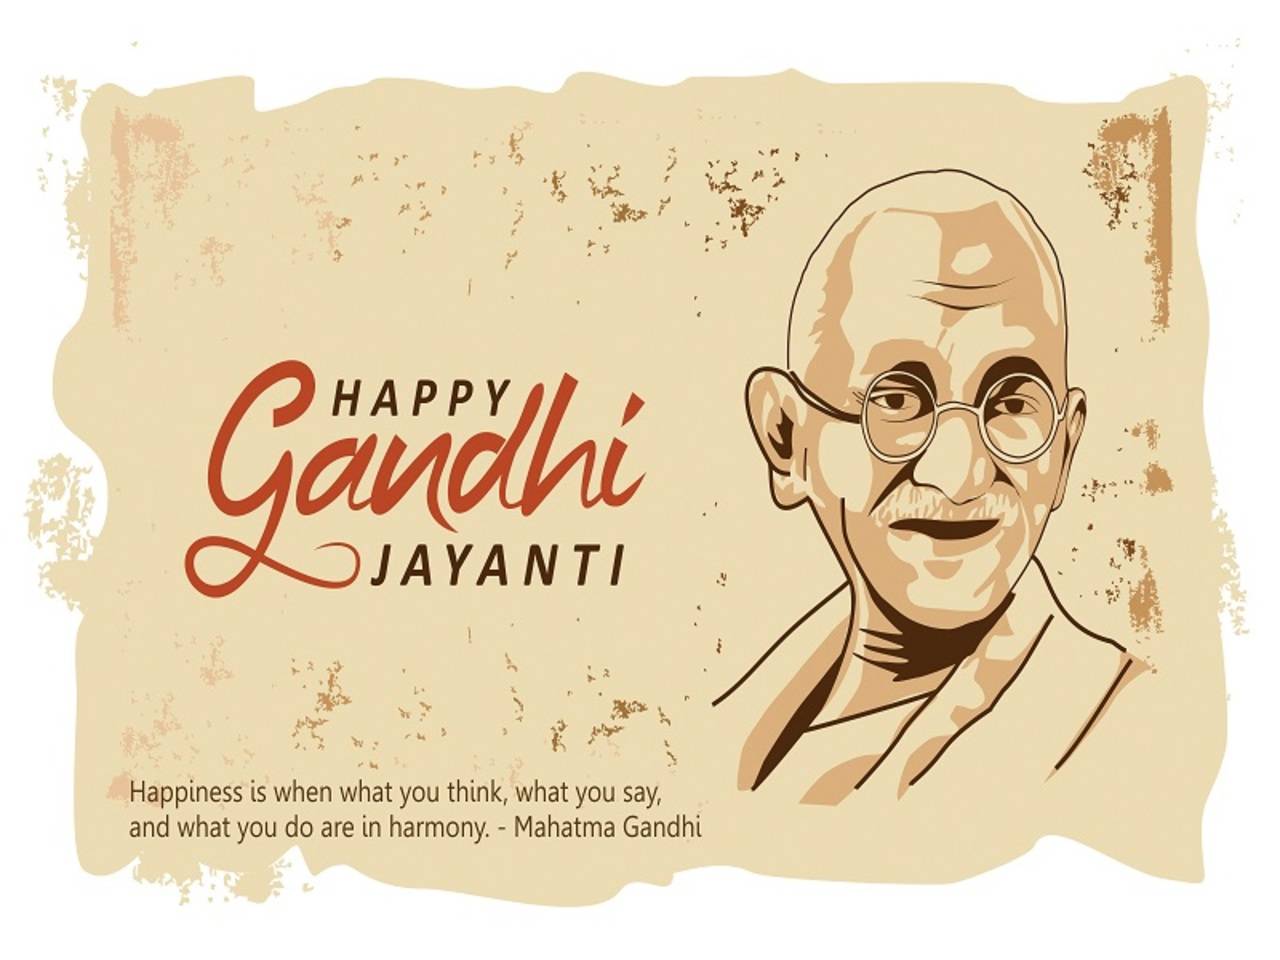 Collection of Gandhi Jayanti Images: Over 999+ Exclusive and Stunning 4K Gandhi  Jayanti Images